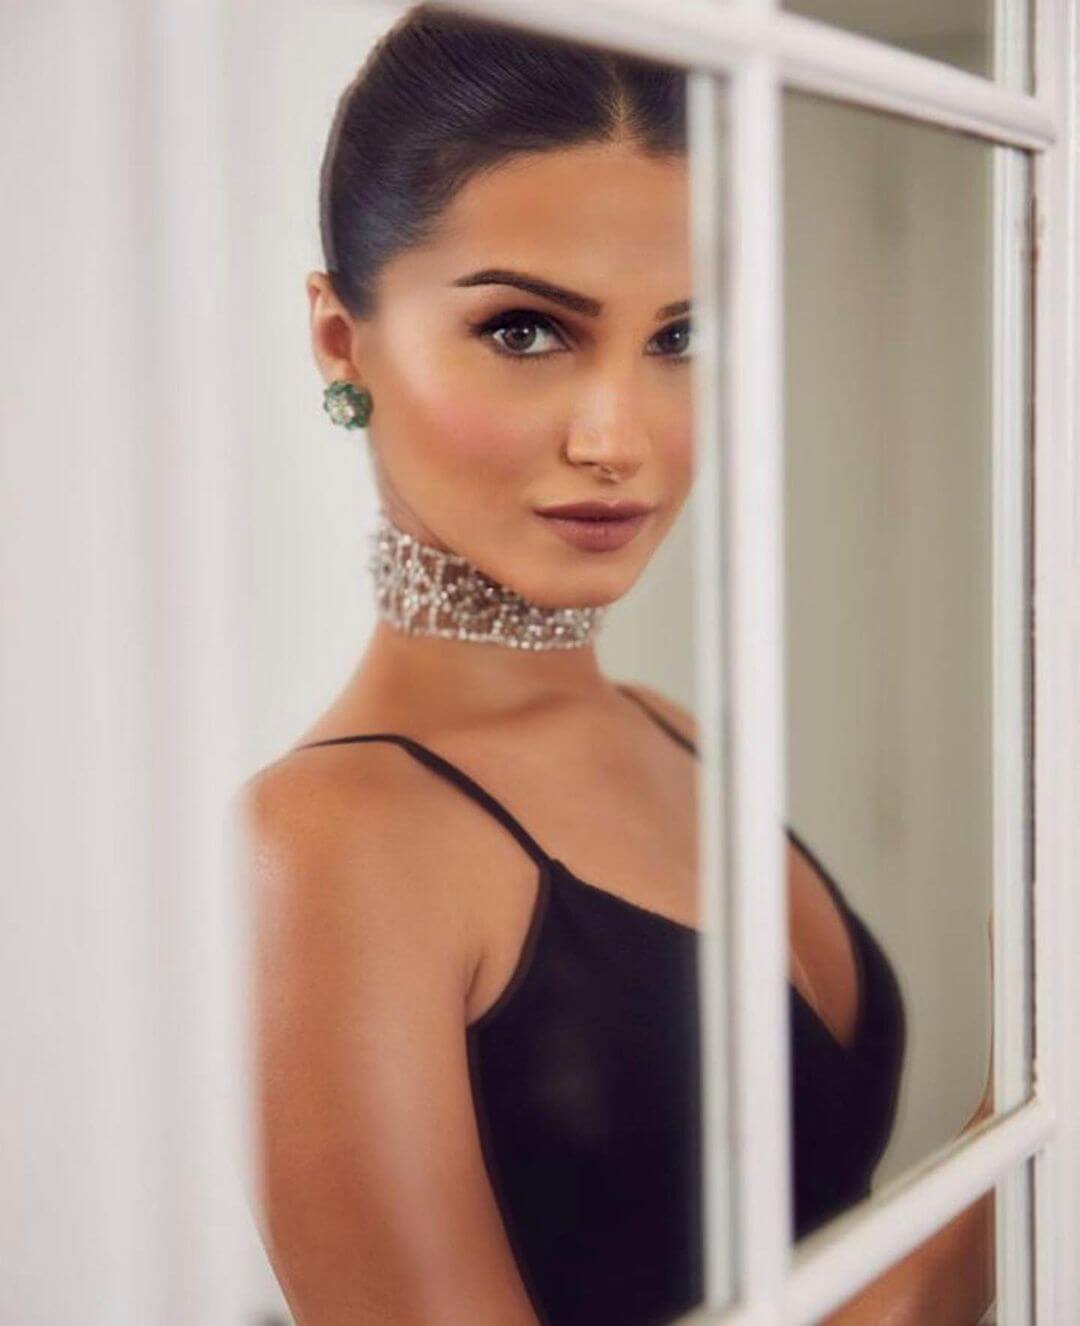 Tara Sutaria Is The Perfect Beauty Inspo For This Season: Tara Sutaria gives us perfection. Photo Credit: www.instagram.com